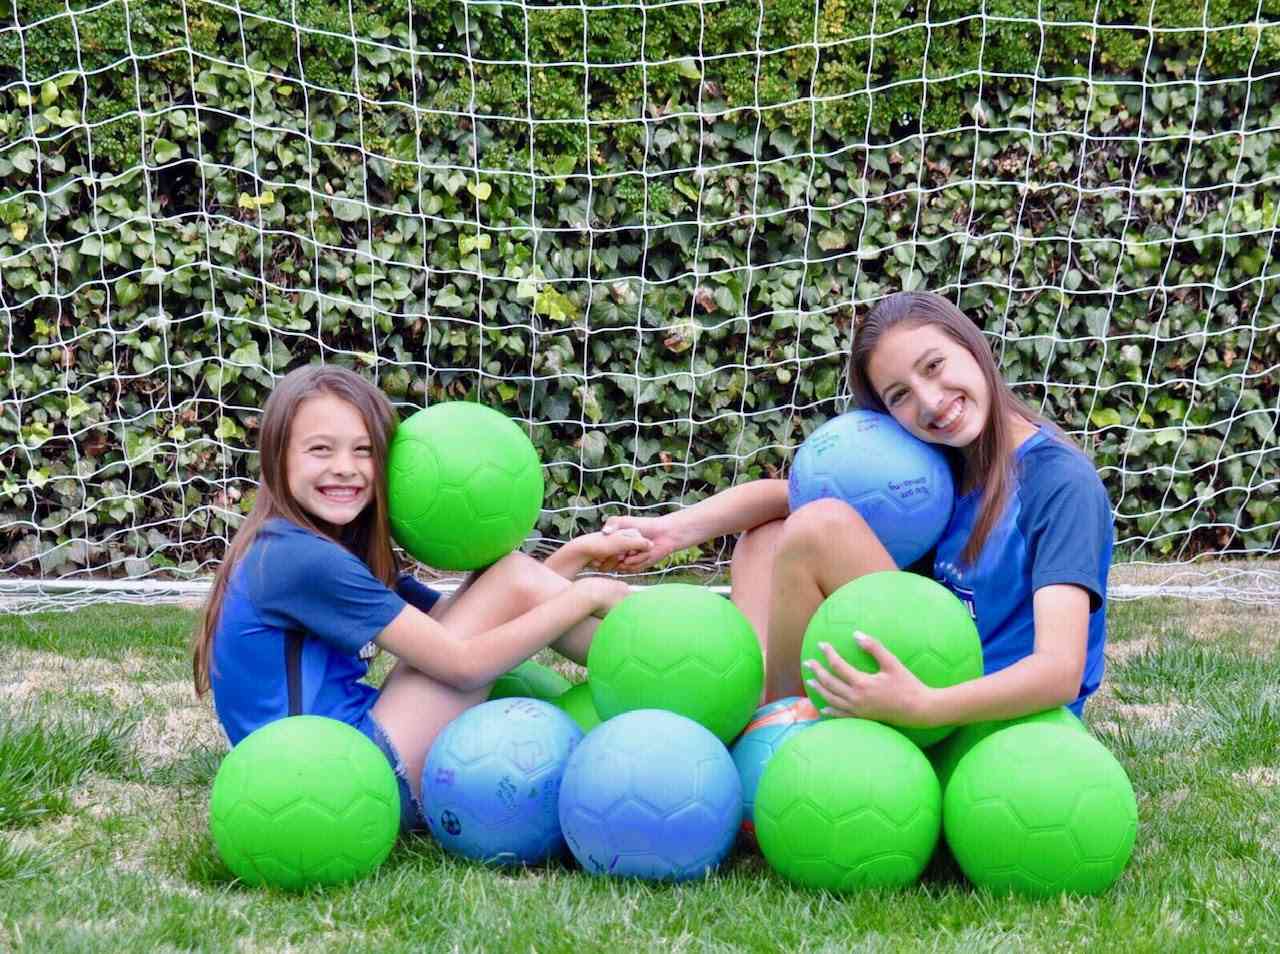 Taylor and Jordyn Jackson with the soccer balls they donate